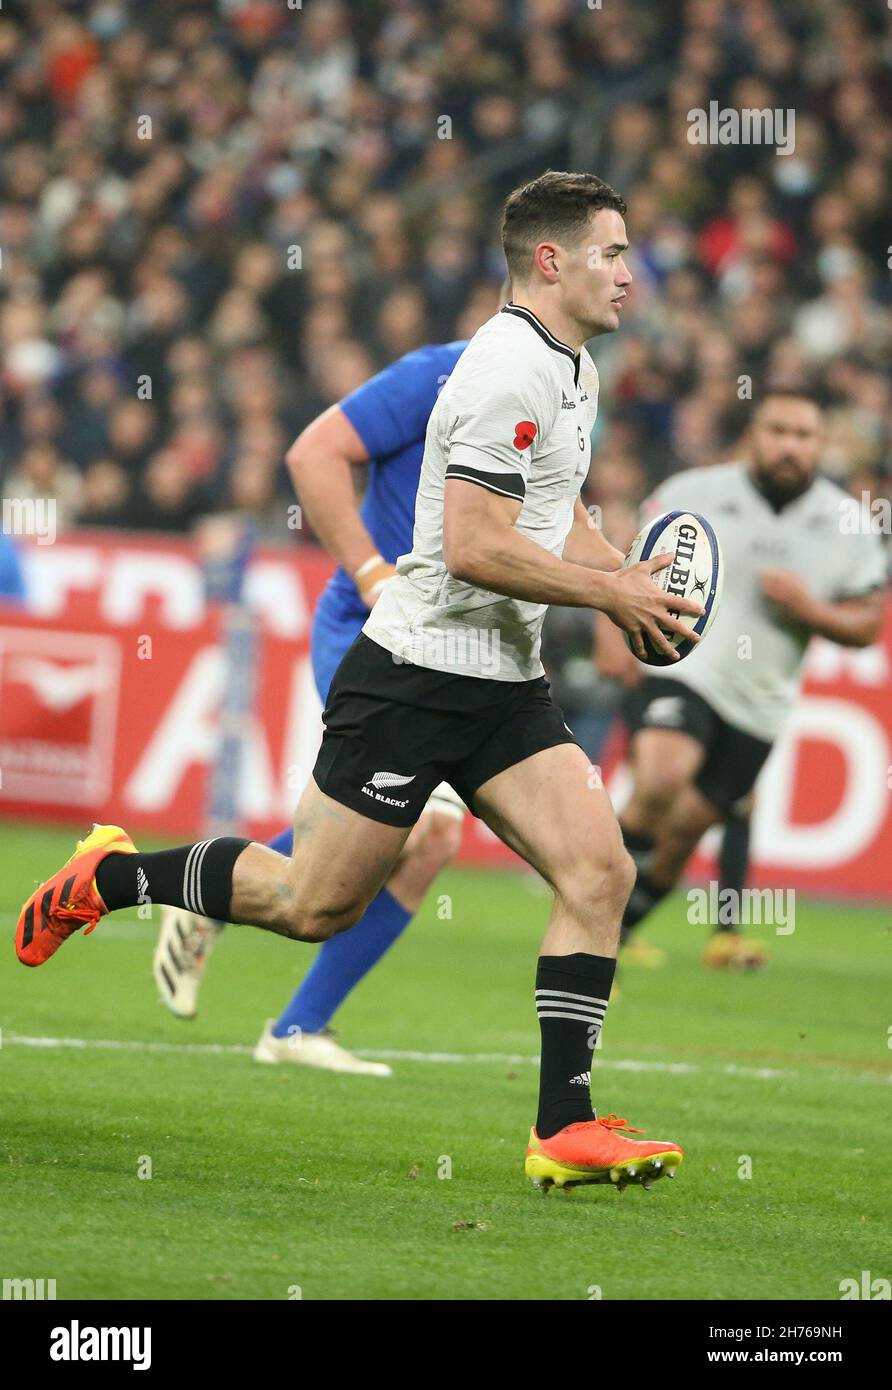 Will Jordan of New Zealand during the Autumn Nations Series 2021, rugby  union test match between France and New Zealand (All Blacks) on November  20, 2021 at Stade de France in Saint-Denis